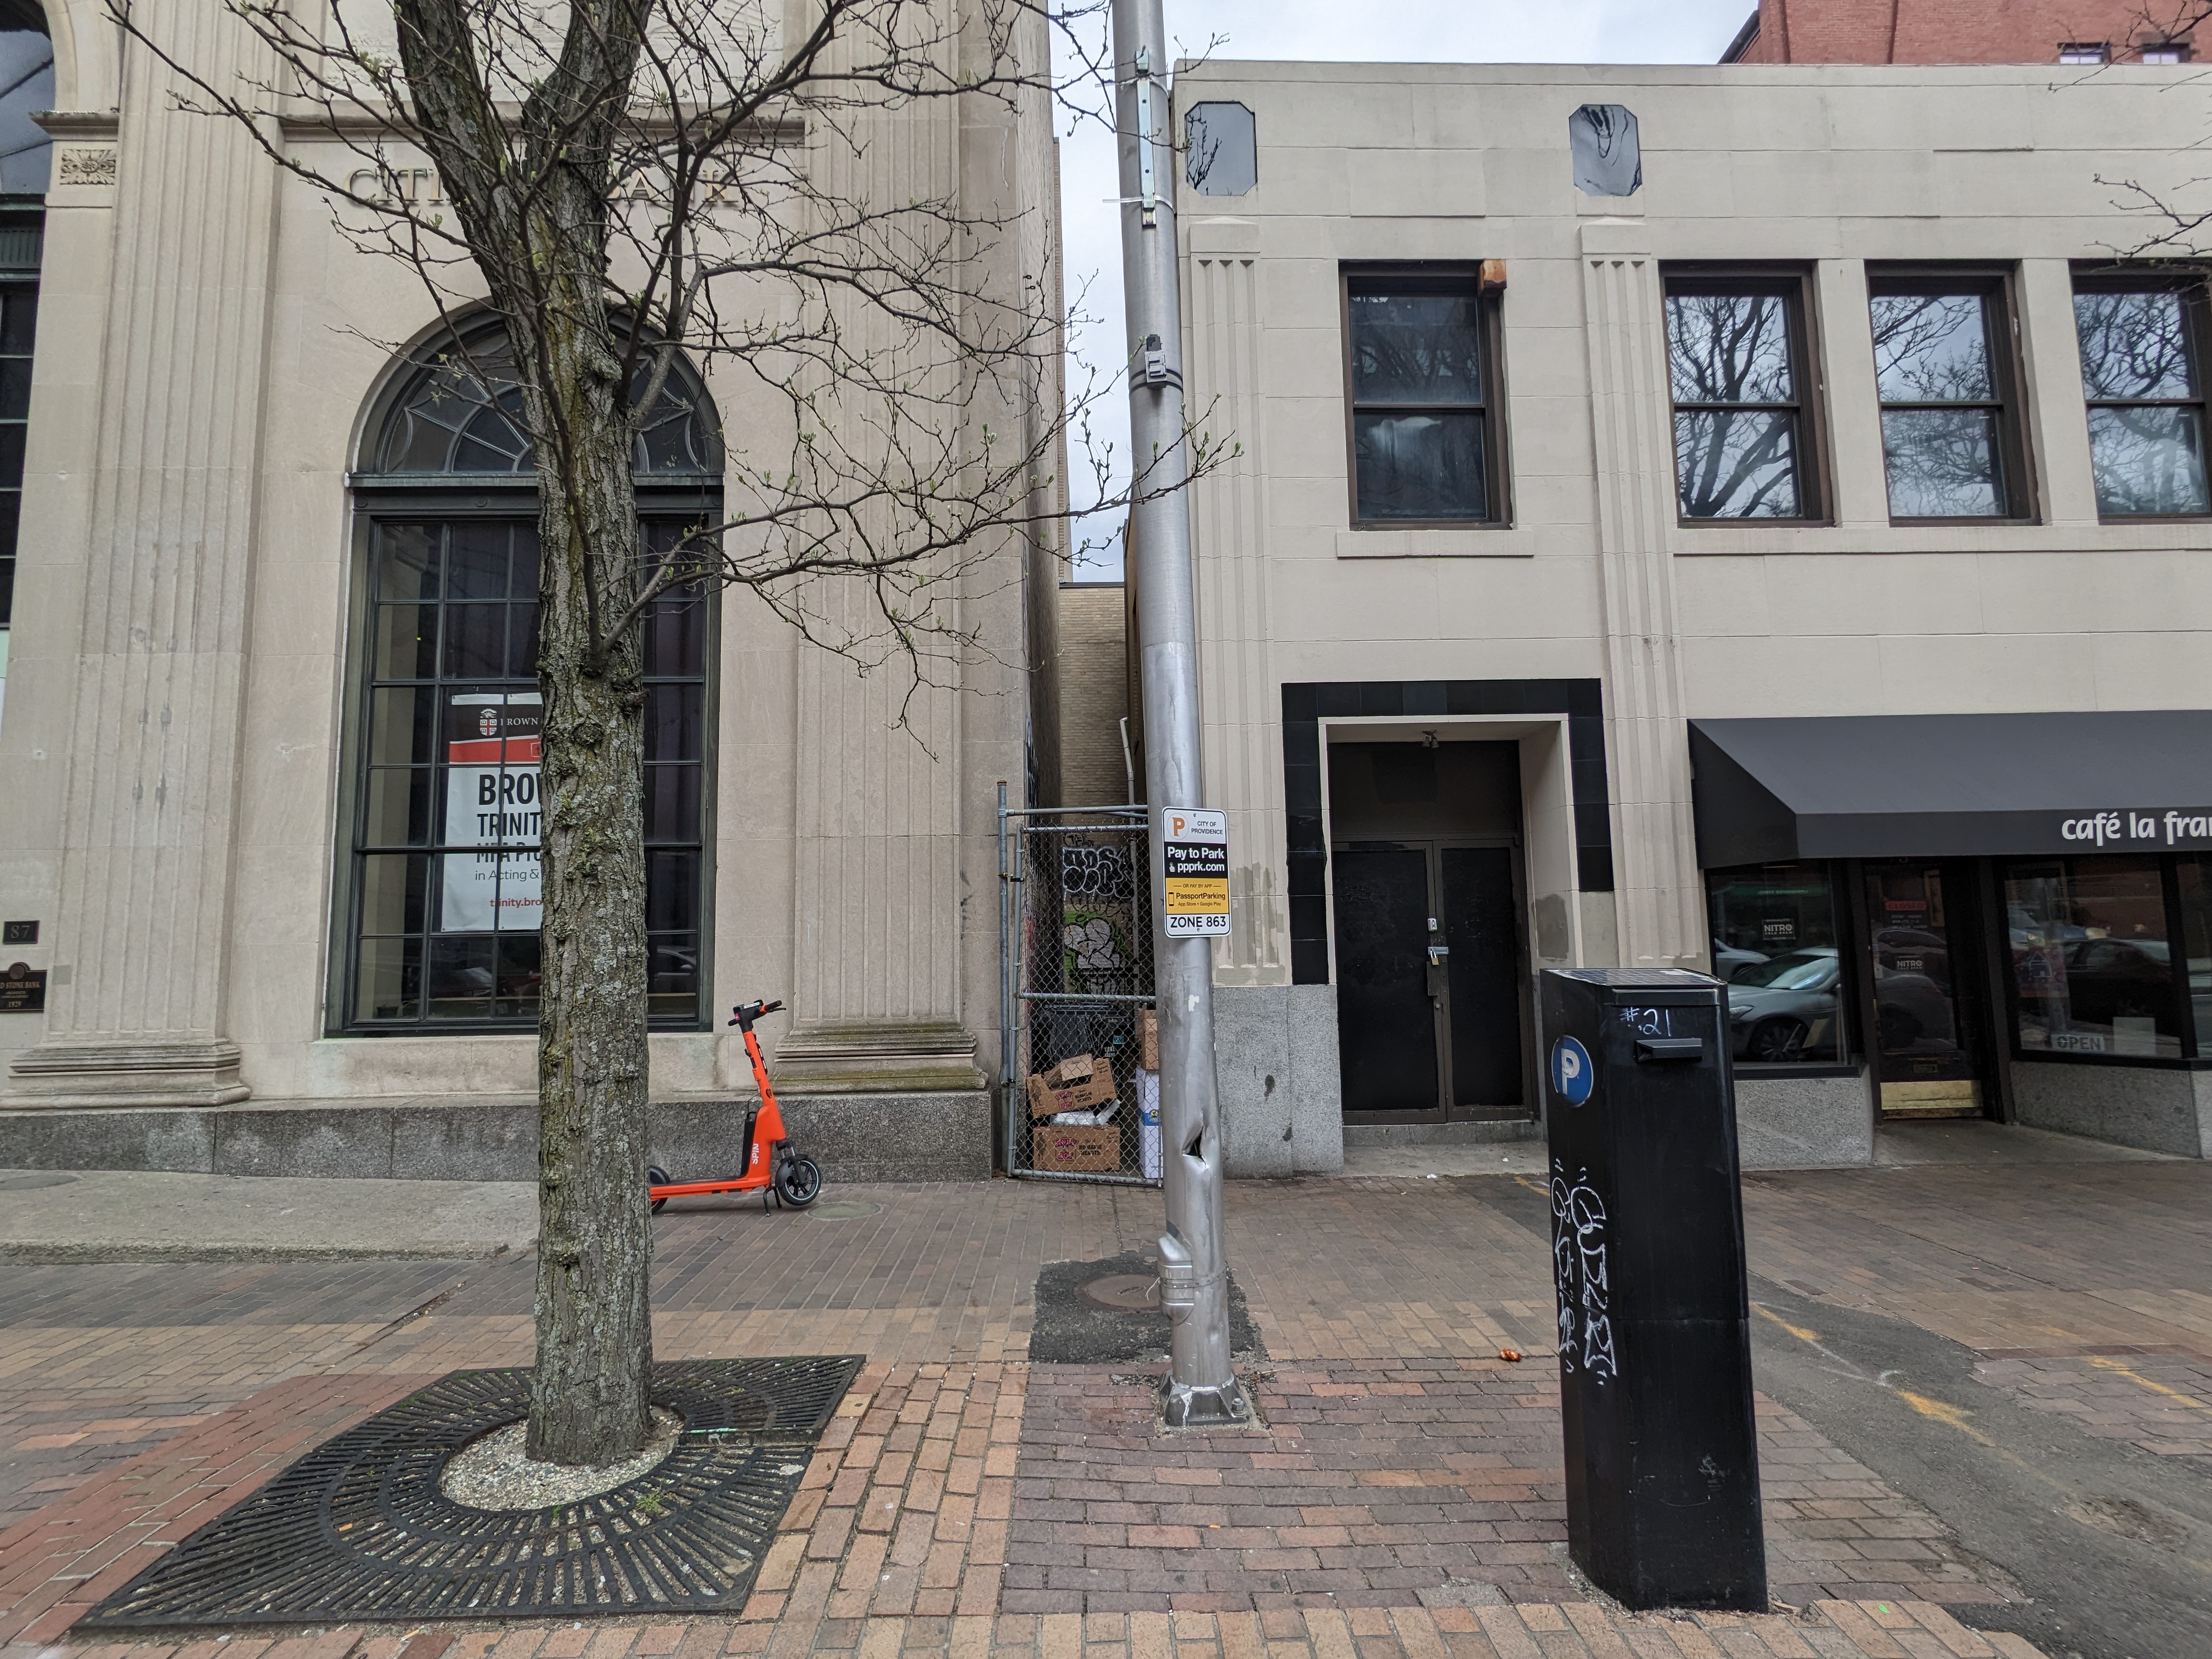 A photograph of a sidewalk with two storefronts, a tree, and a parking meter